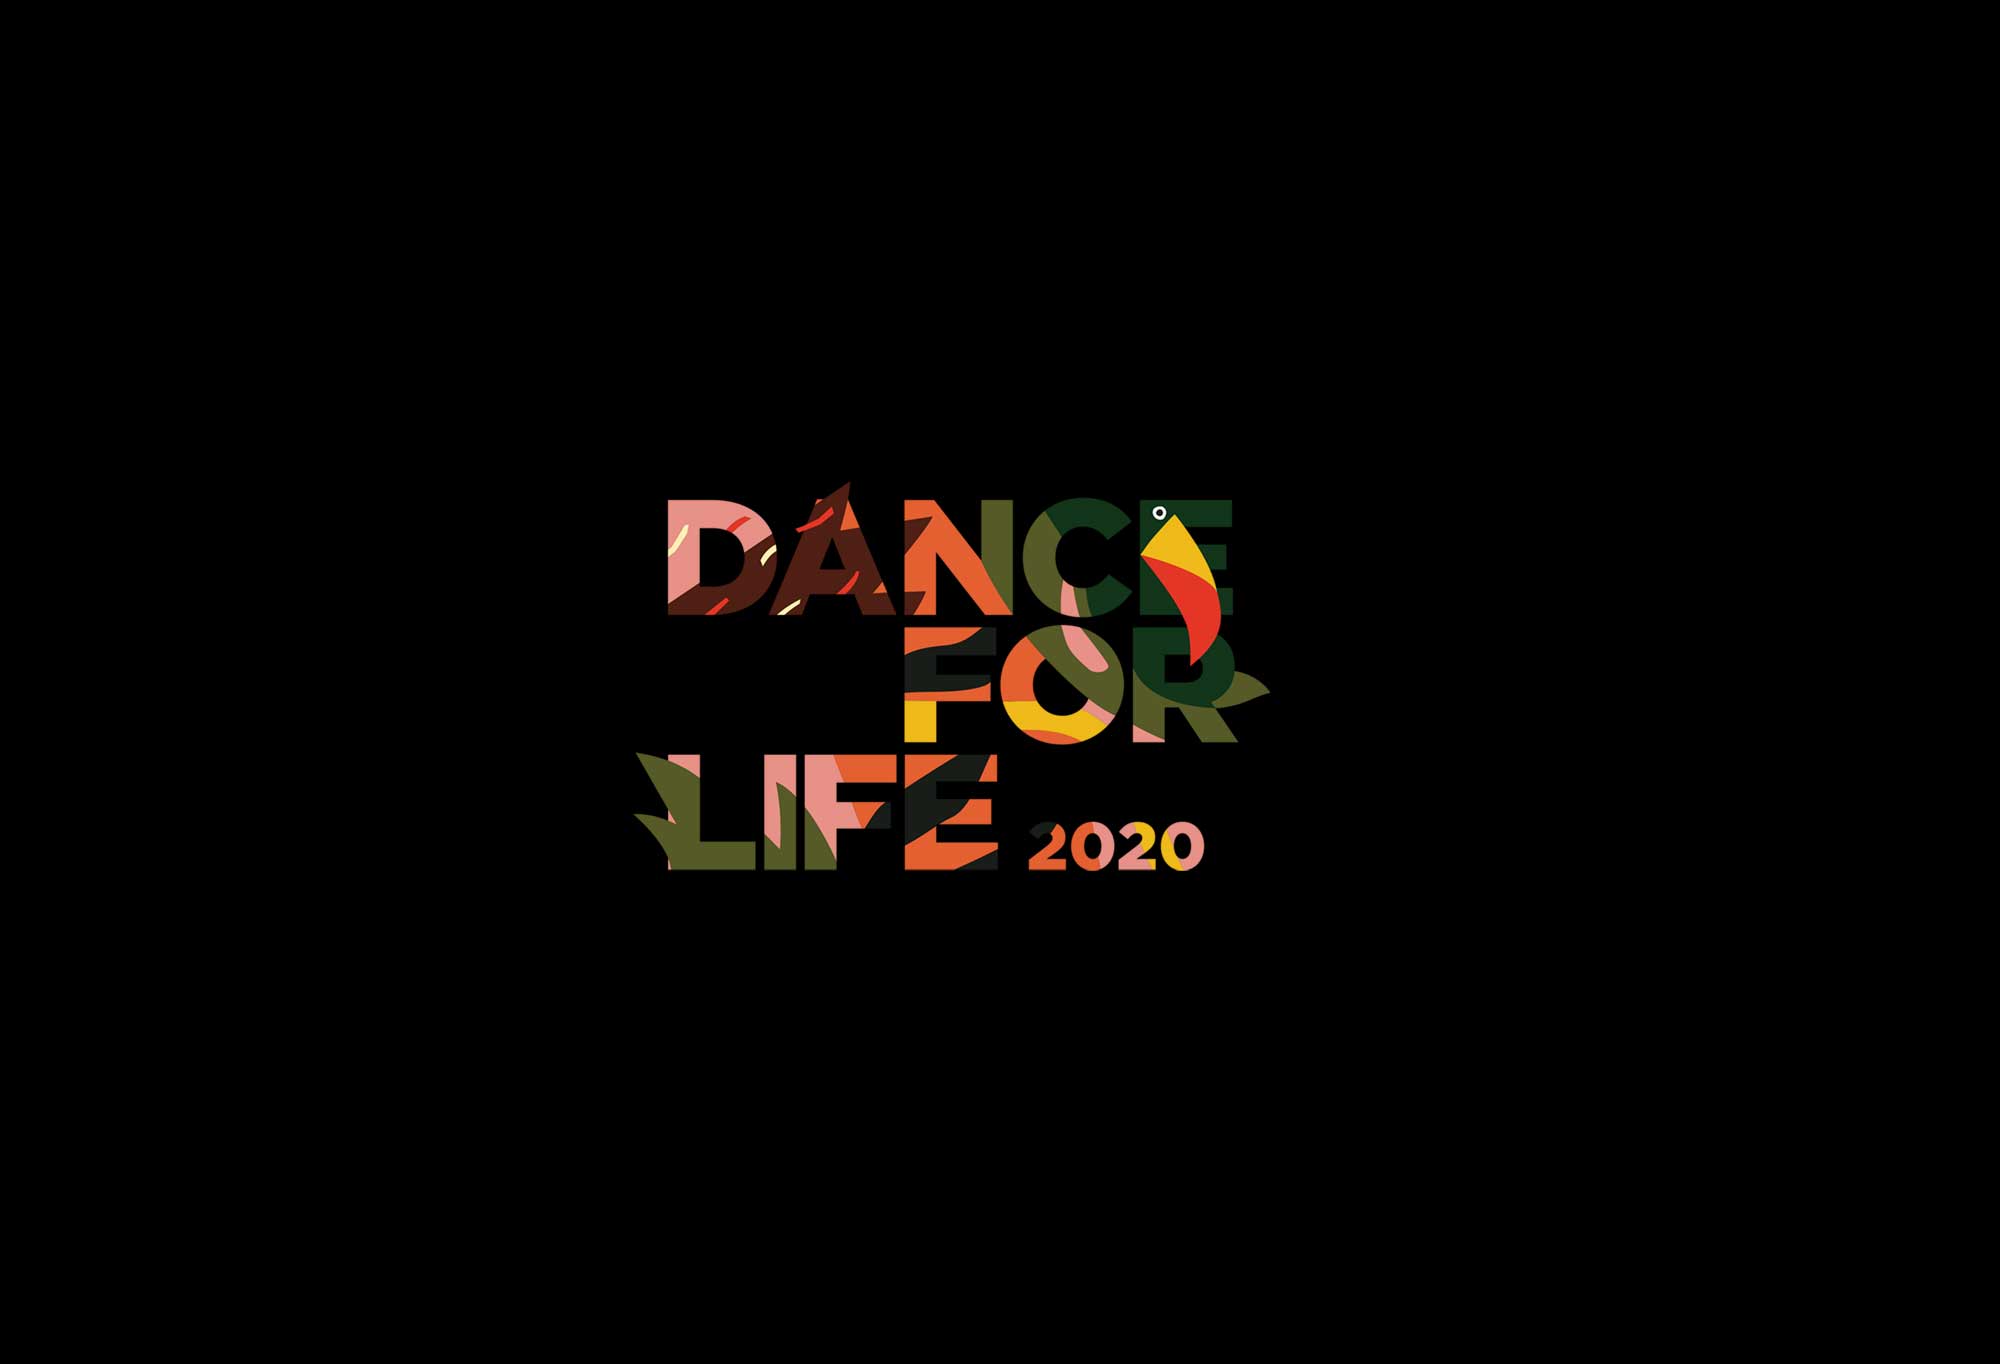 Dance for LIFE, the Australian charity evening